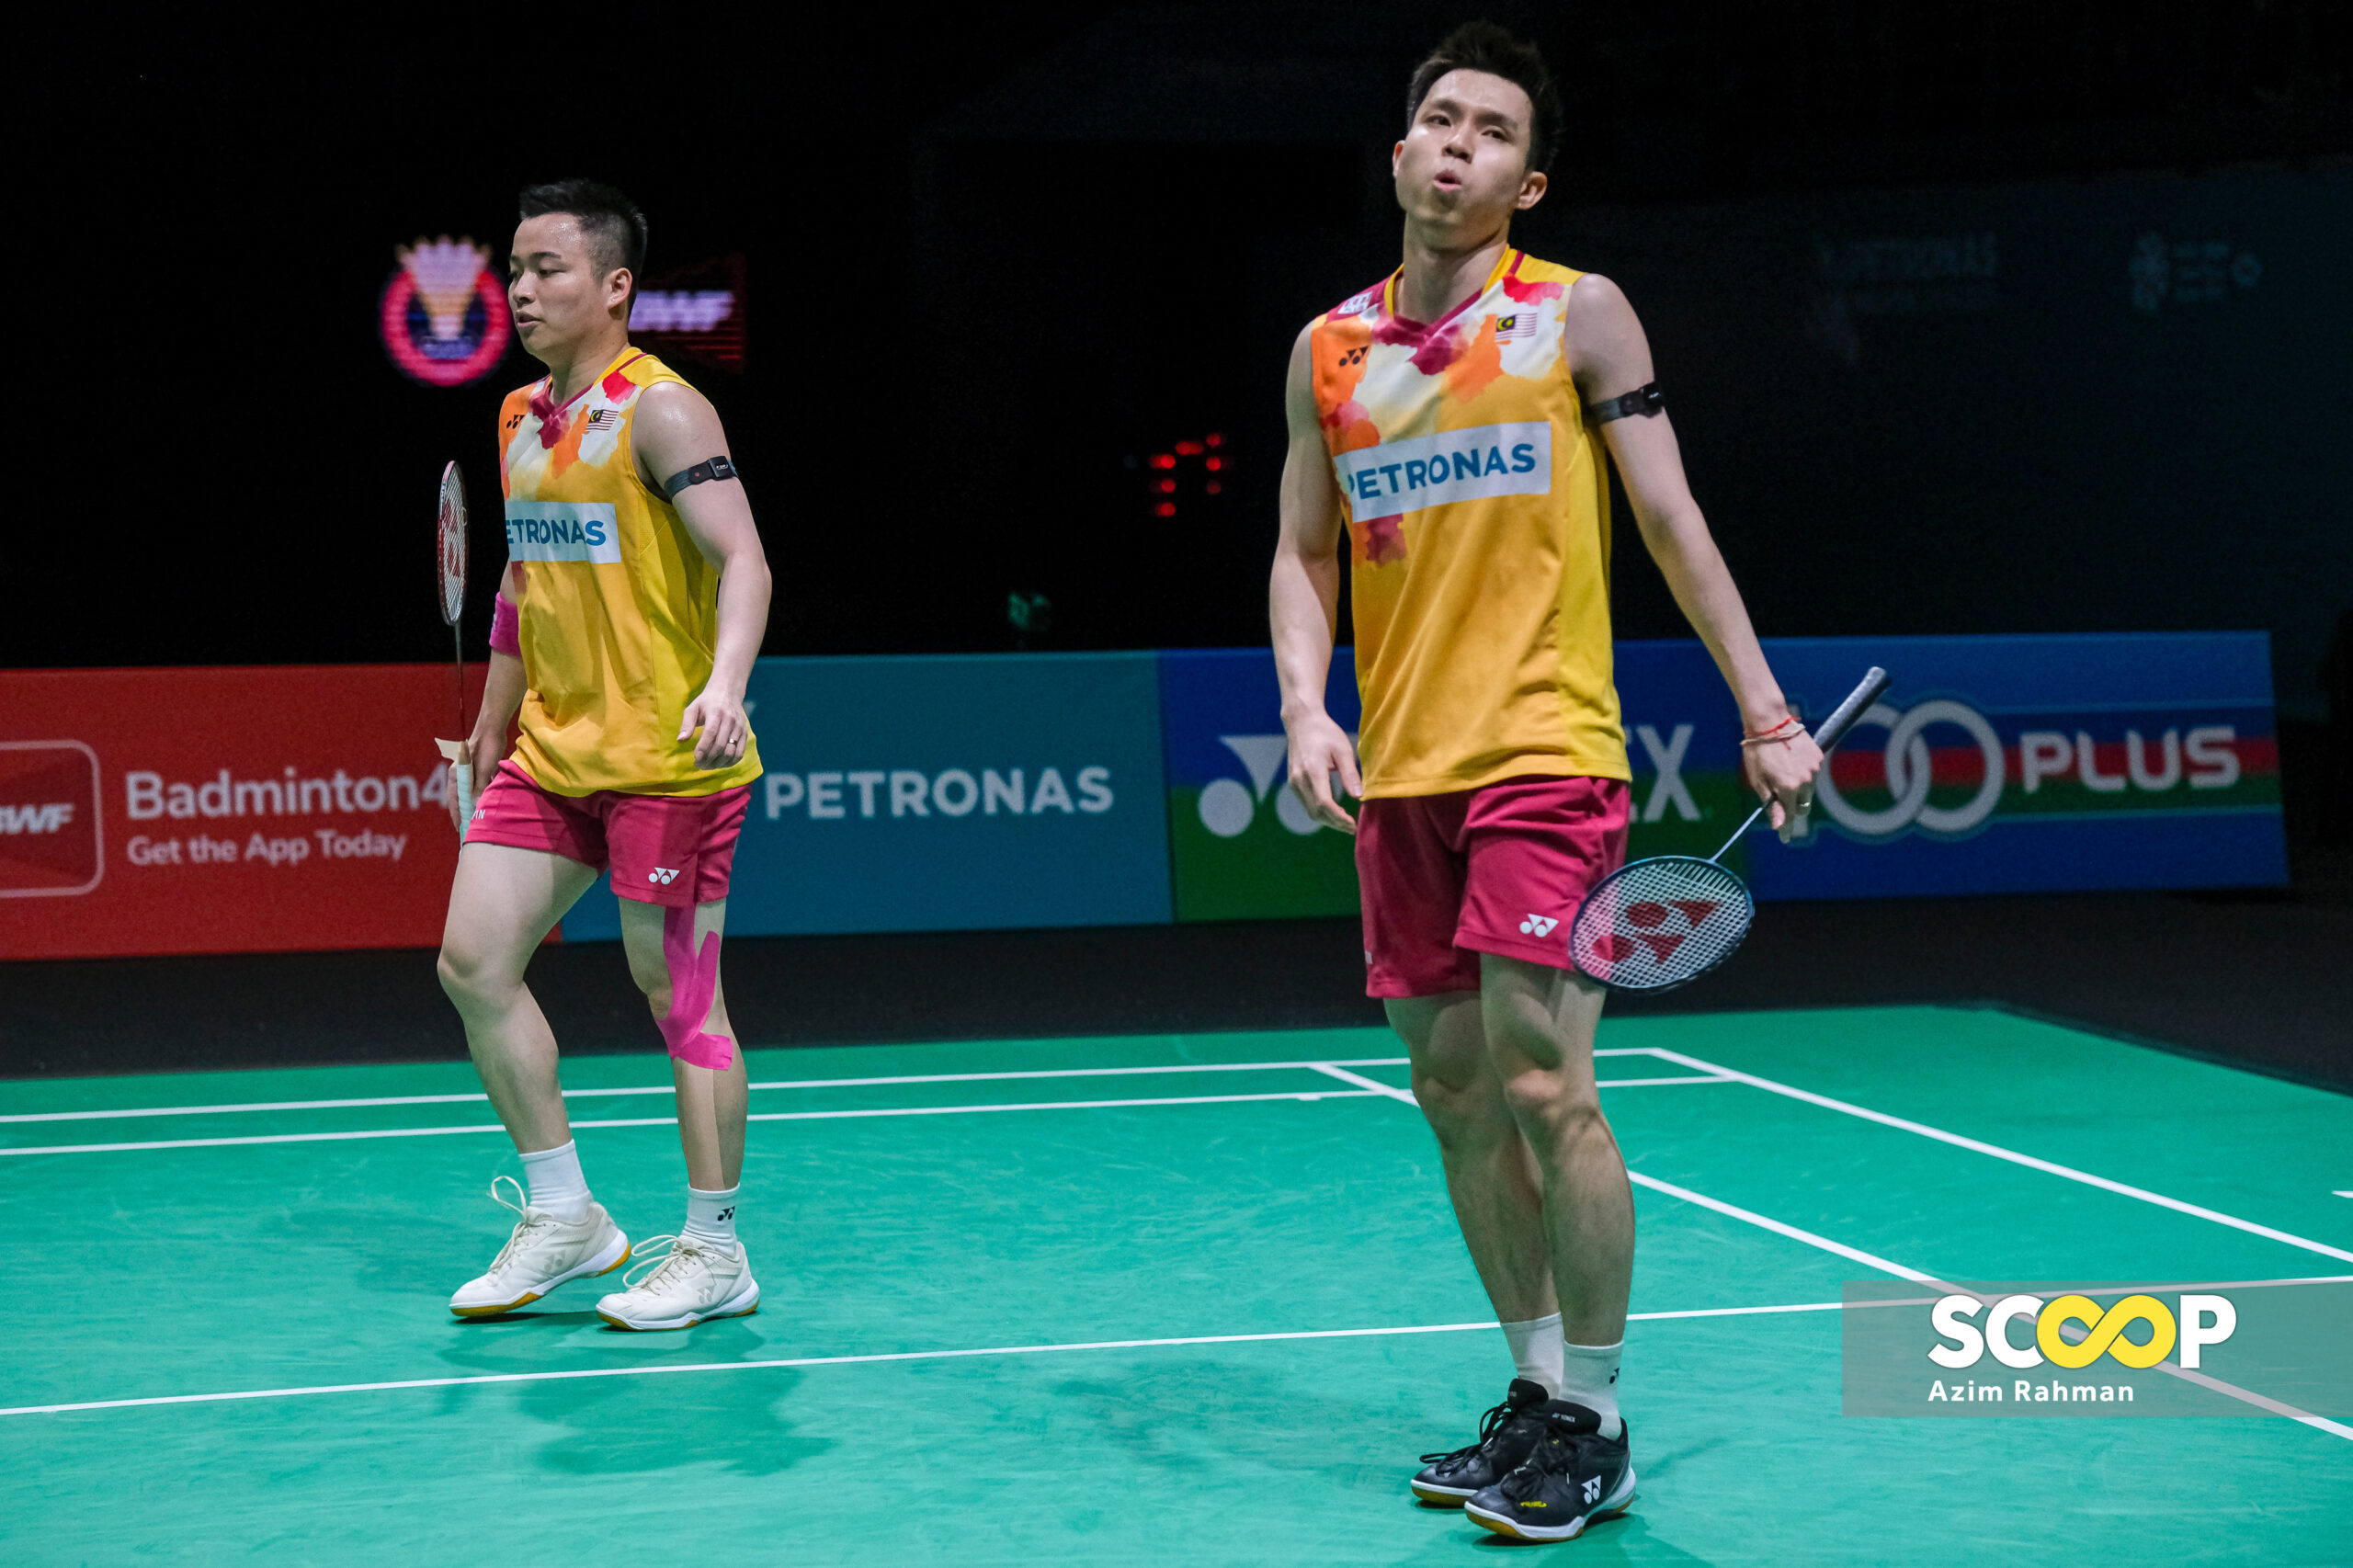 India Open: Aaron Chia and Soh Wooi Yik make it to two quarterfinals in a row